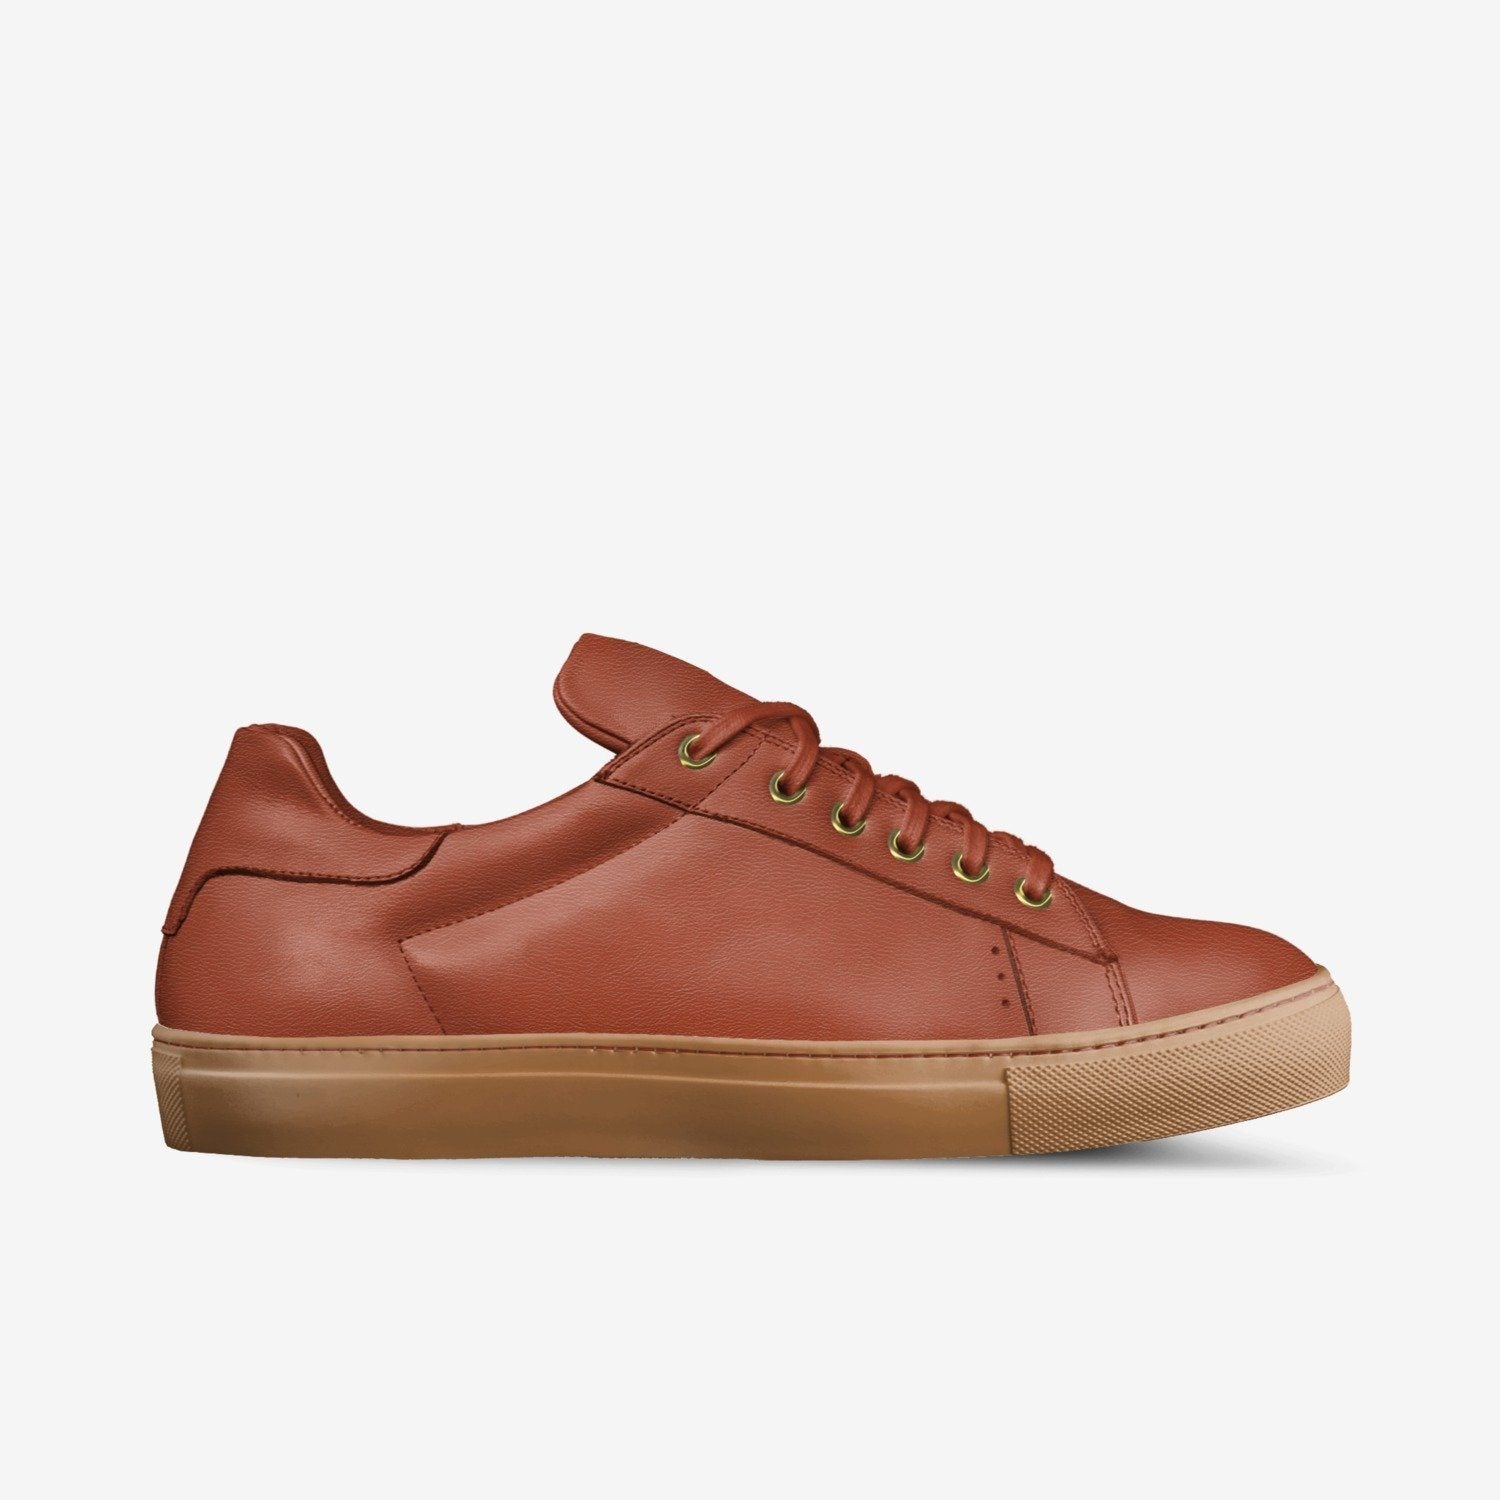 LORENZO LEATHER/GUM SOLE SNEAKERS IN VERMILLION | Poor Little Rich Boy Clothing